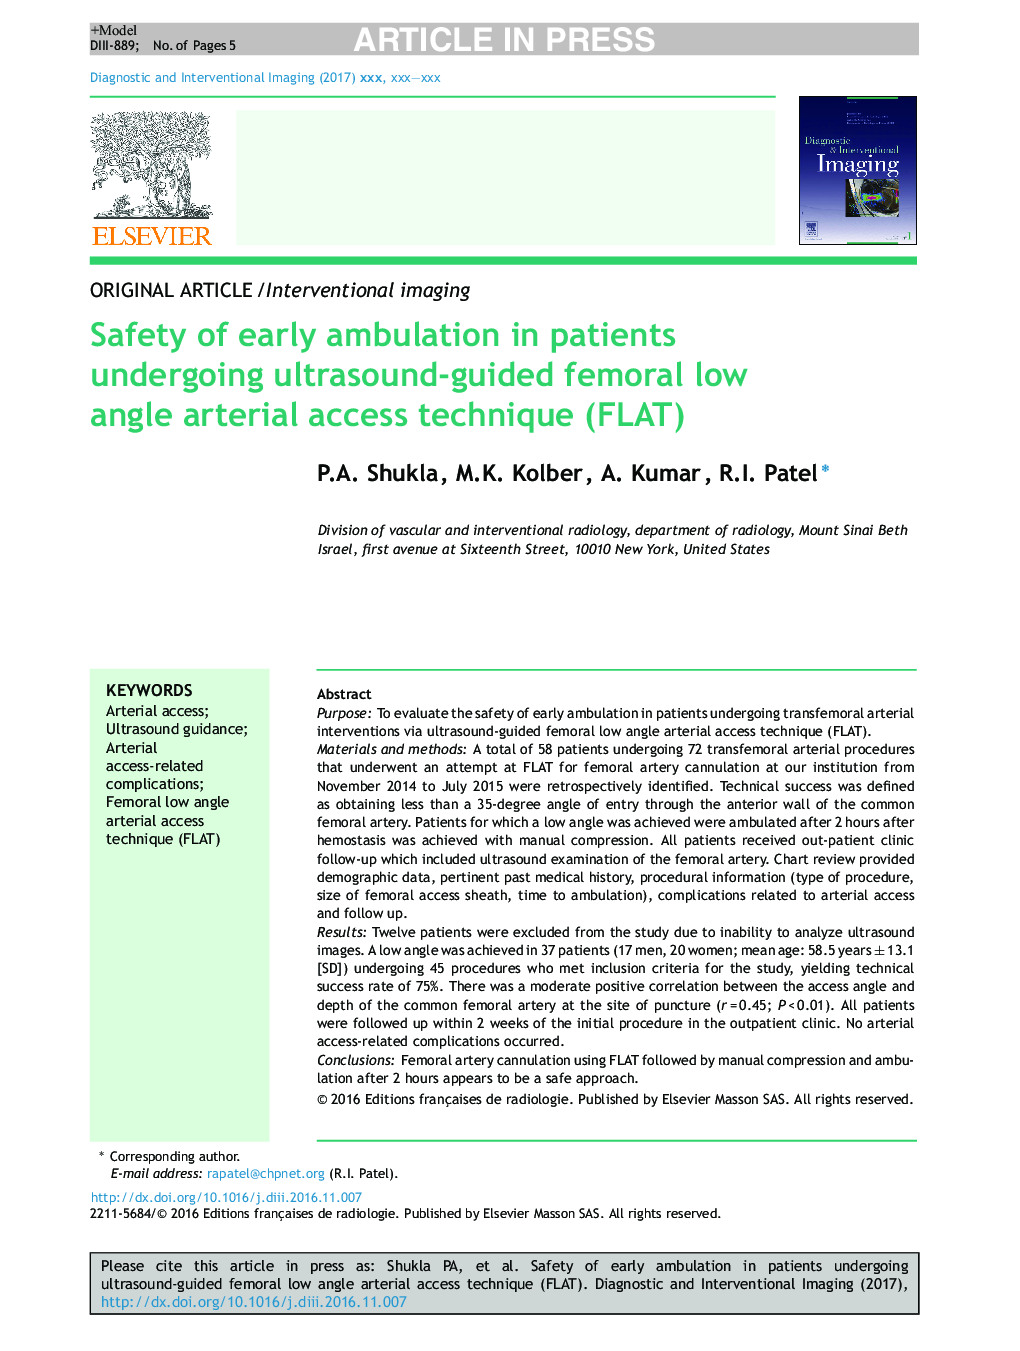 Safety of early ambulation in patients undergoing ultrasound-guided femoral low angle arterial access technique (FLAT)